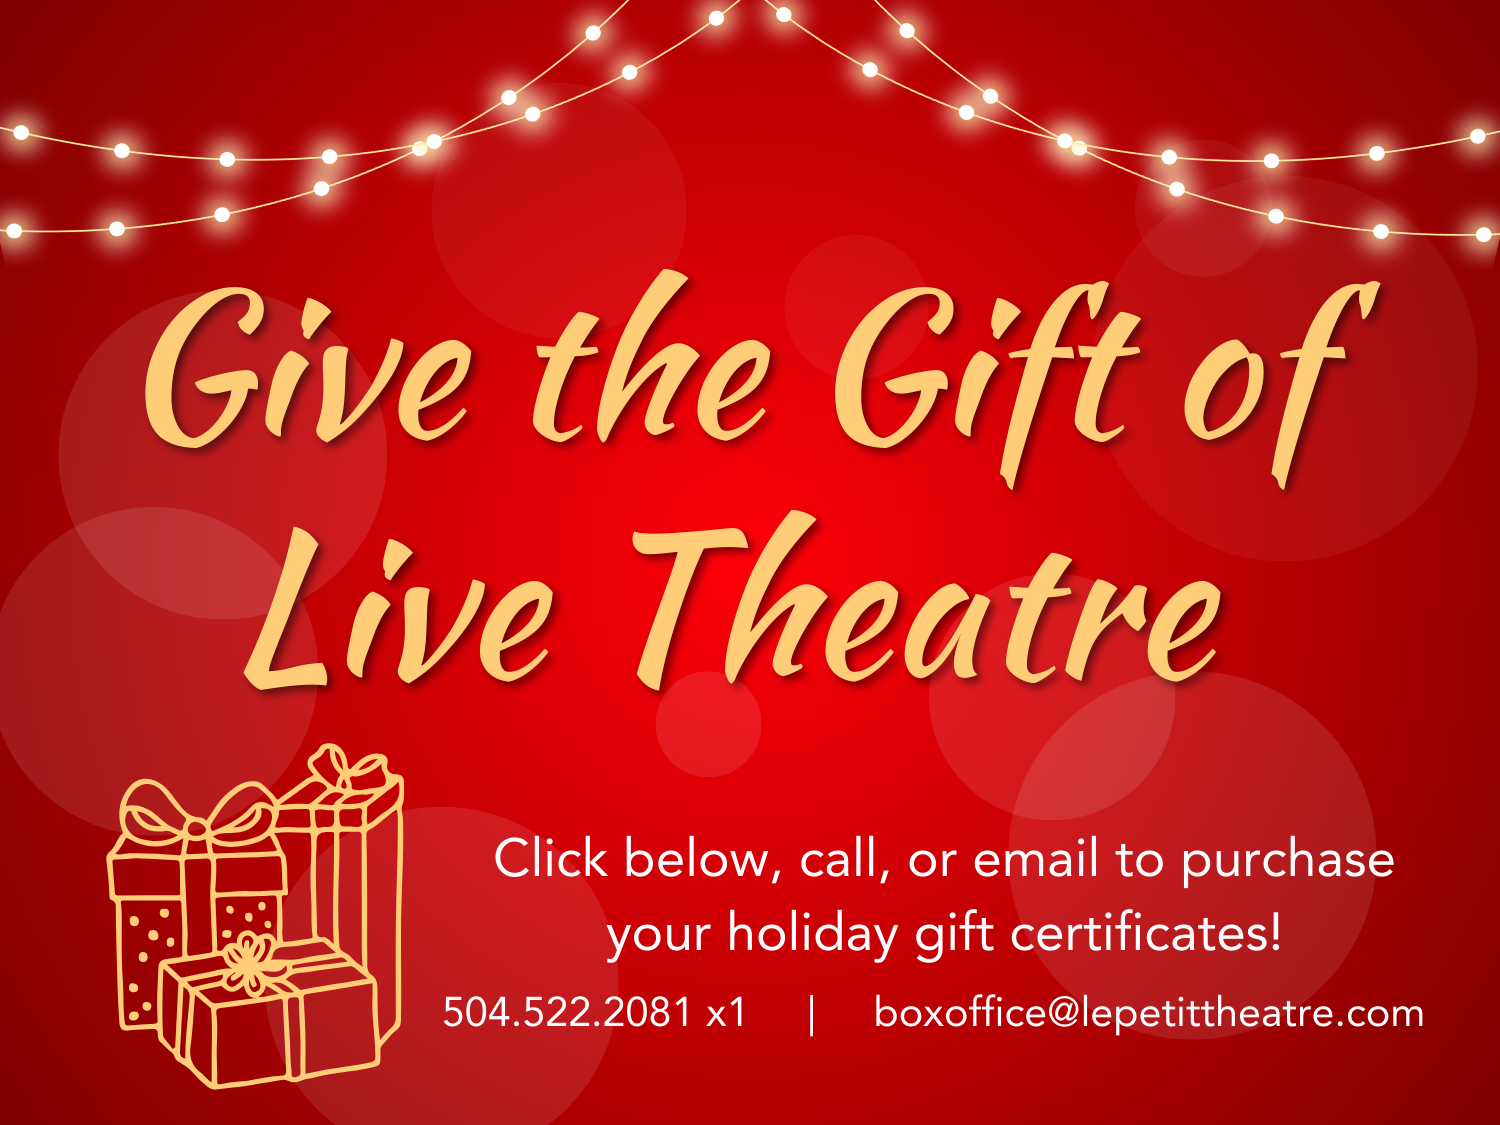 Click here or call 504-522-2081 to purchase your gift certificates.